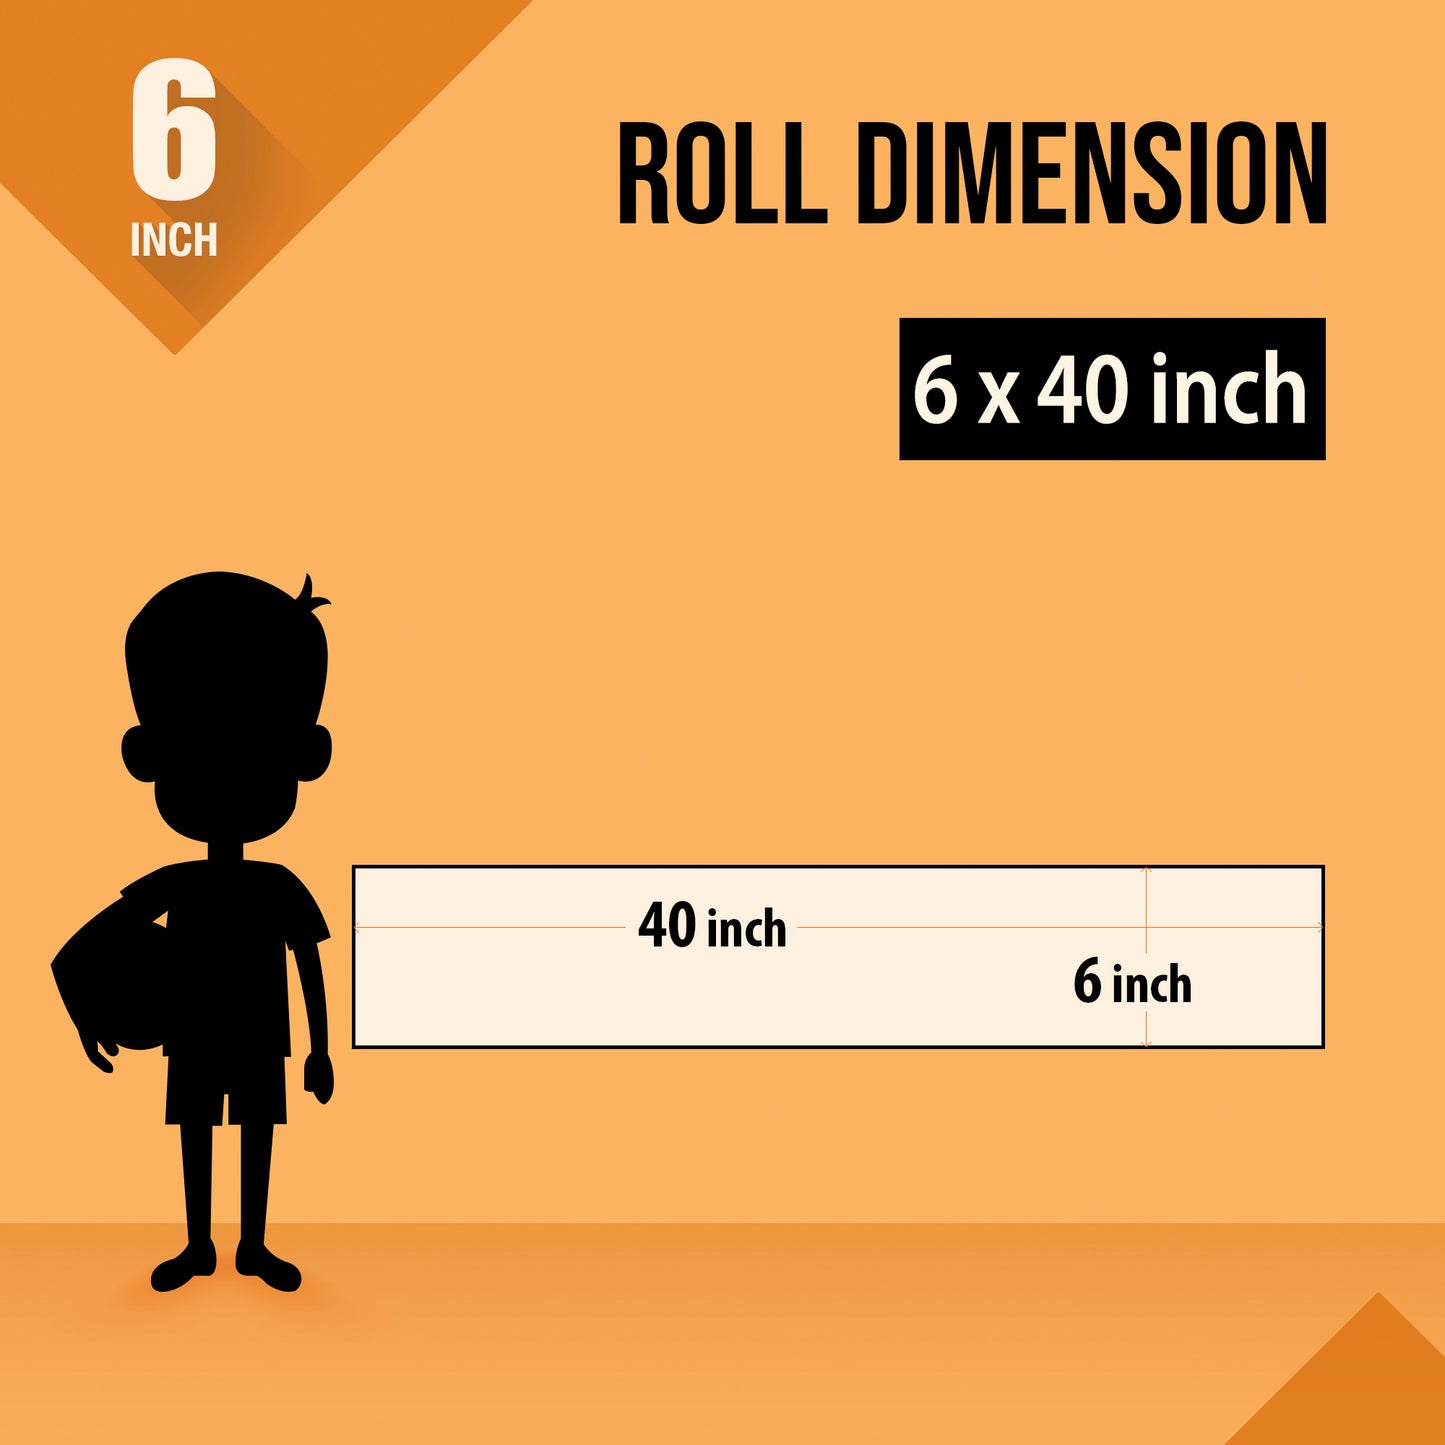 The image depicts an green background with a ruler showing a child's height next to a 6*40 inches paper roll attached to the wall.